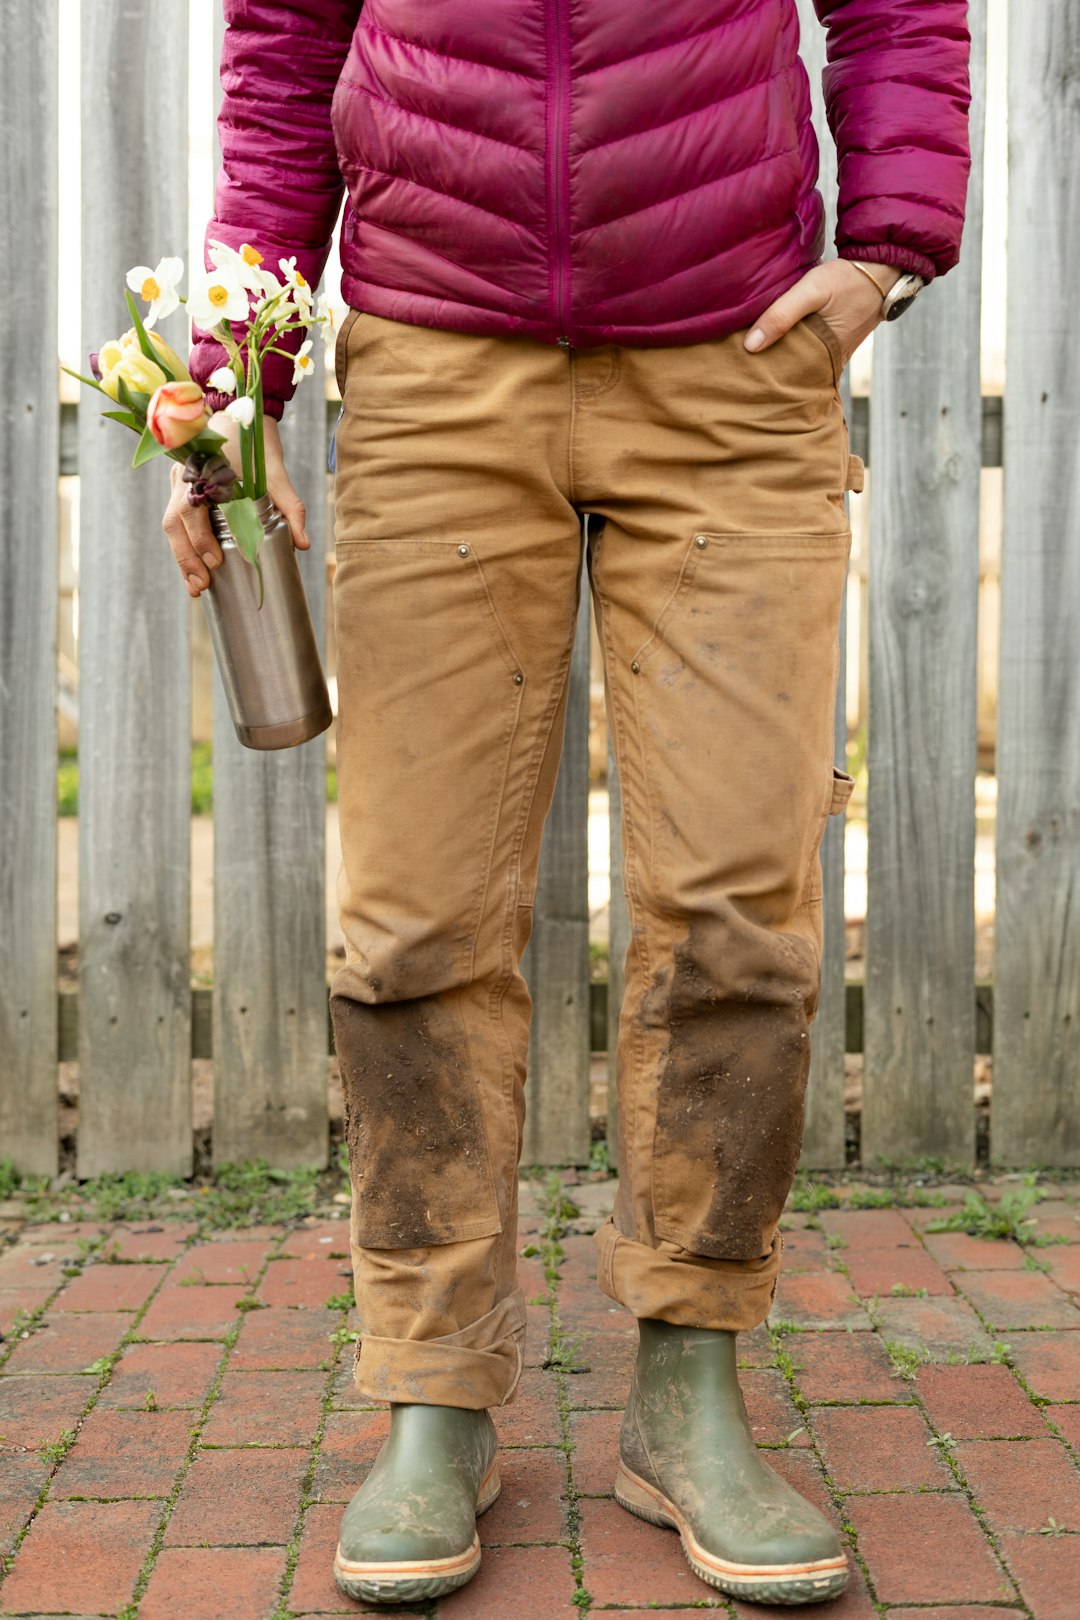 person in brown pants and purple shirt holding flower bouquet